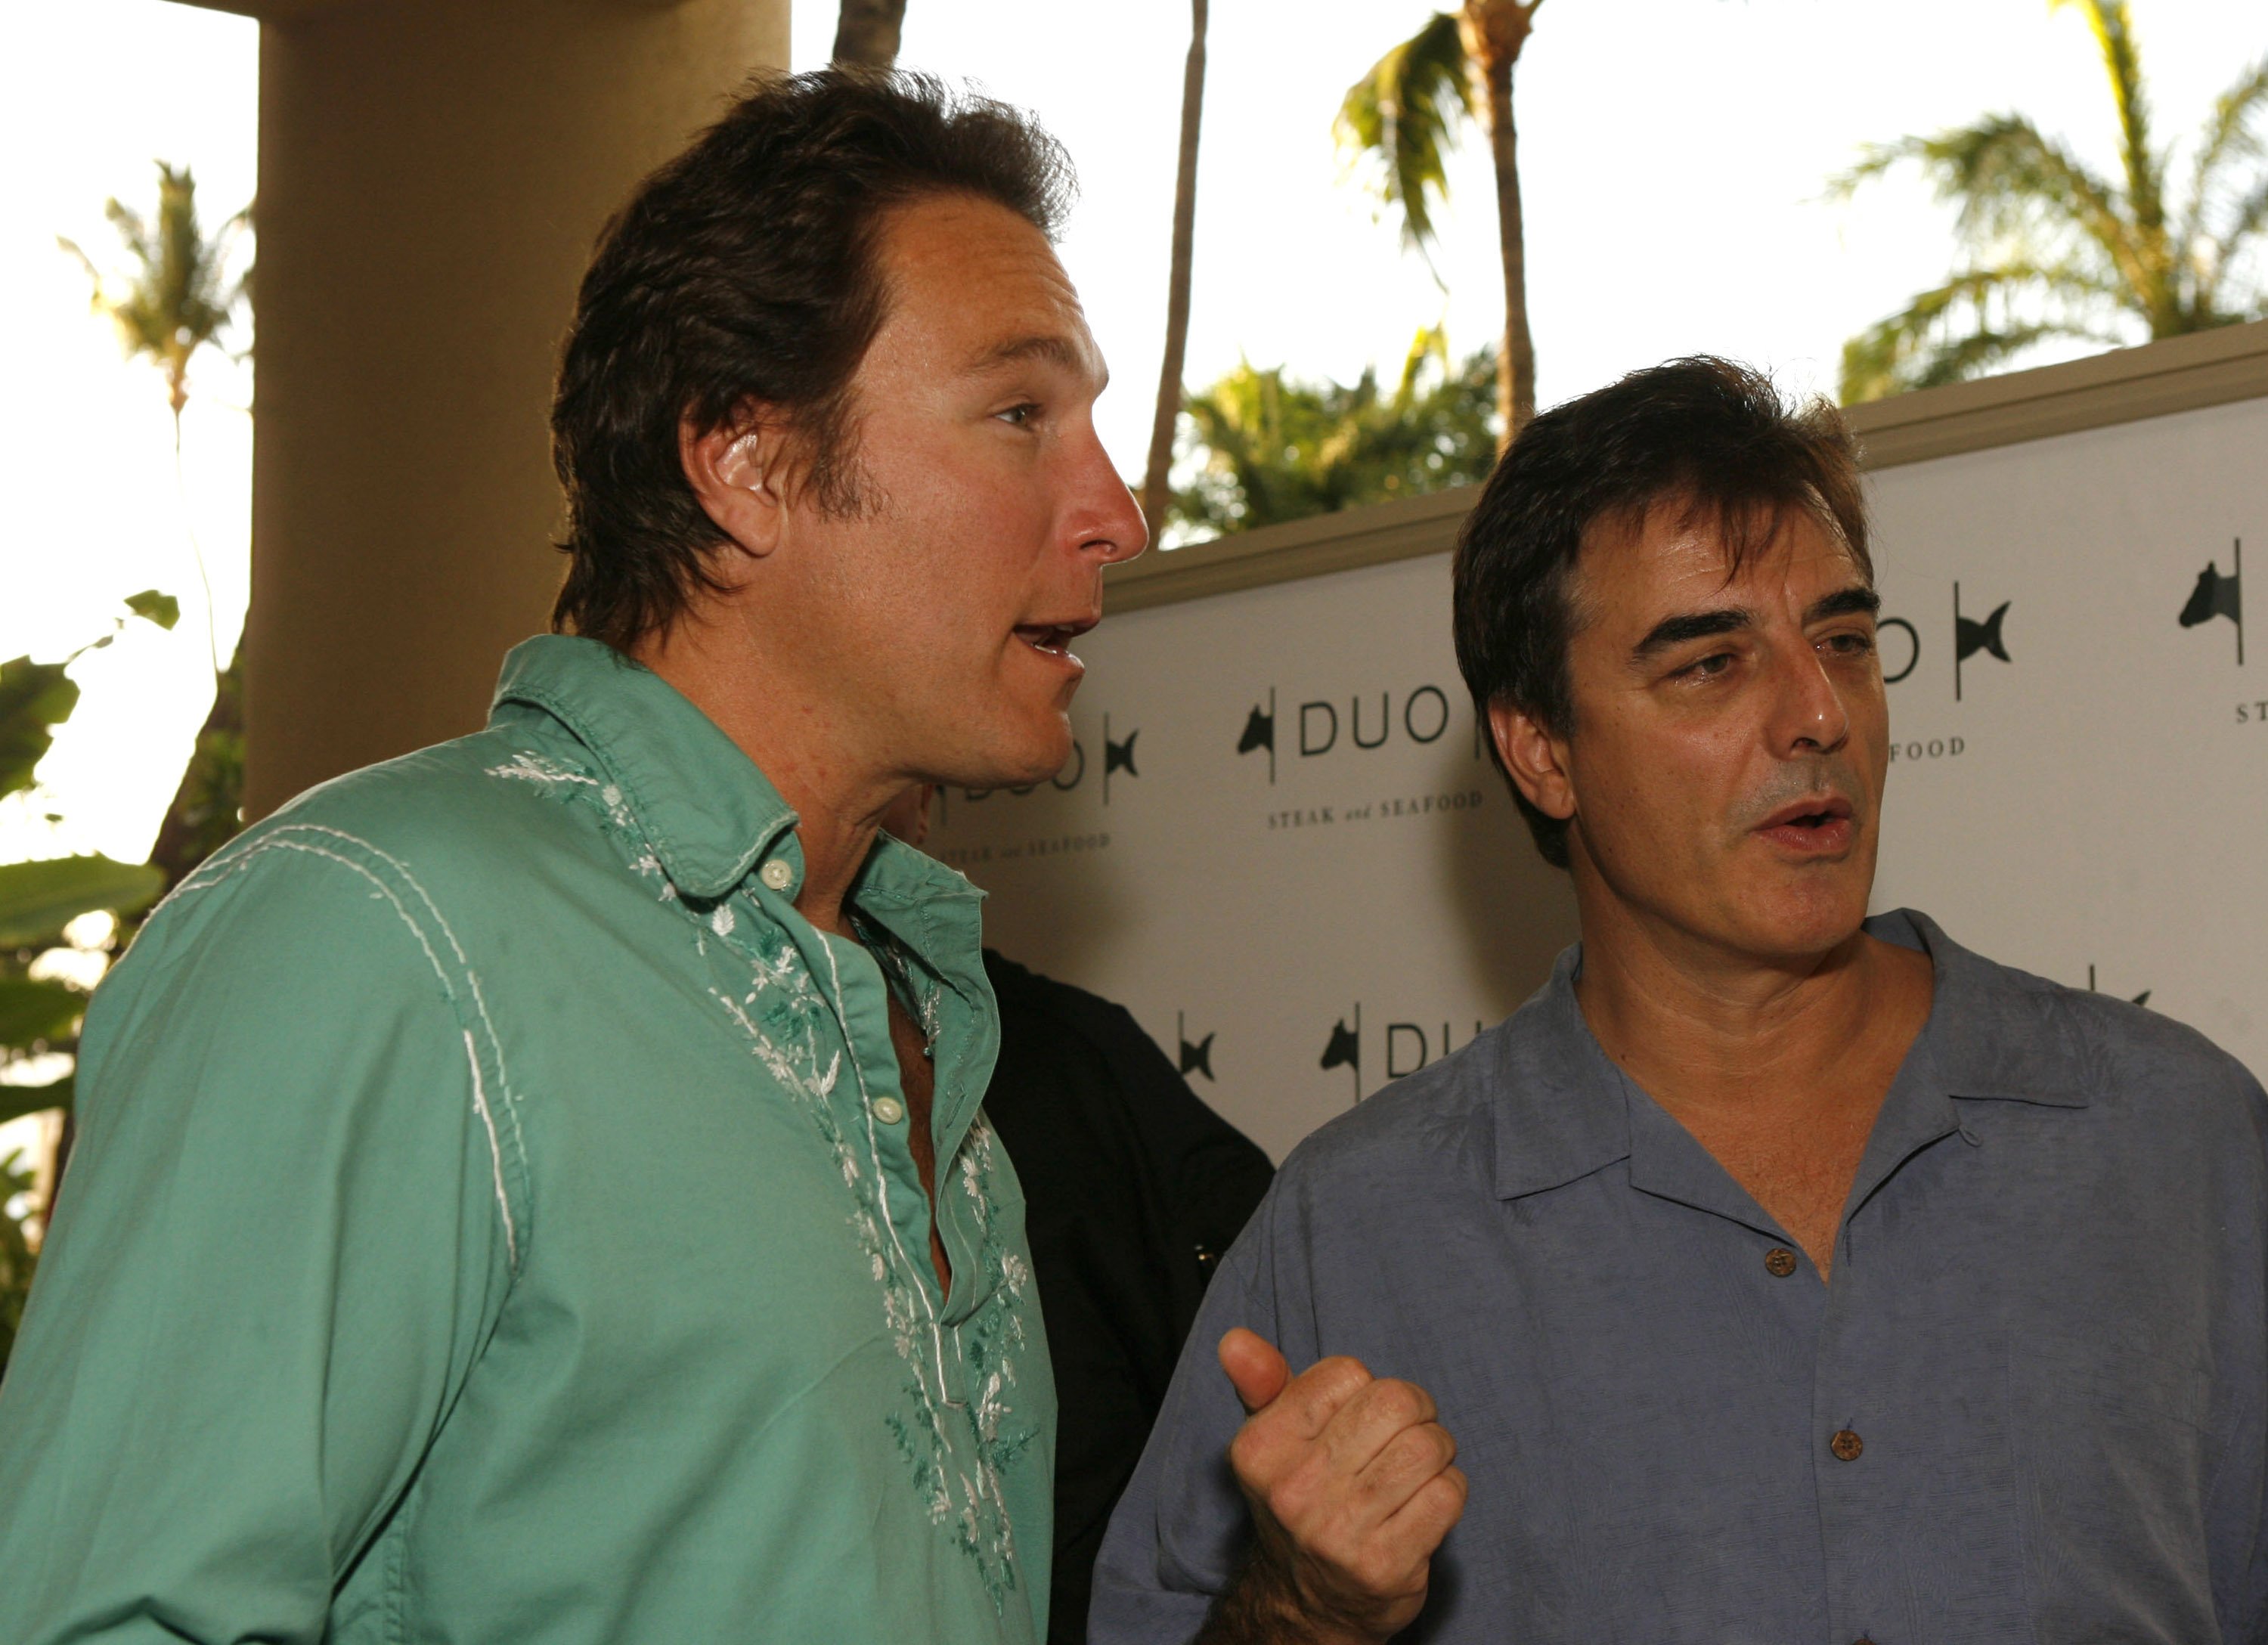 John Corbett and Chris Noth chat with a group at the Duo Grand Opening at the Four Seasons Maui